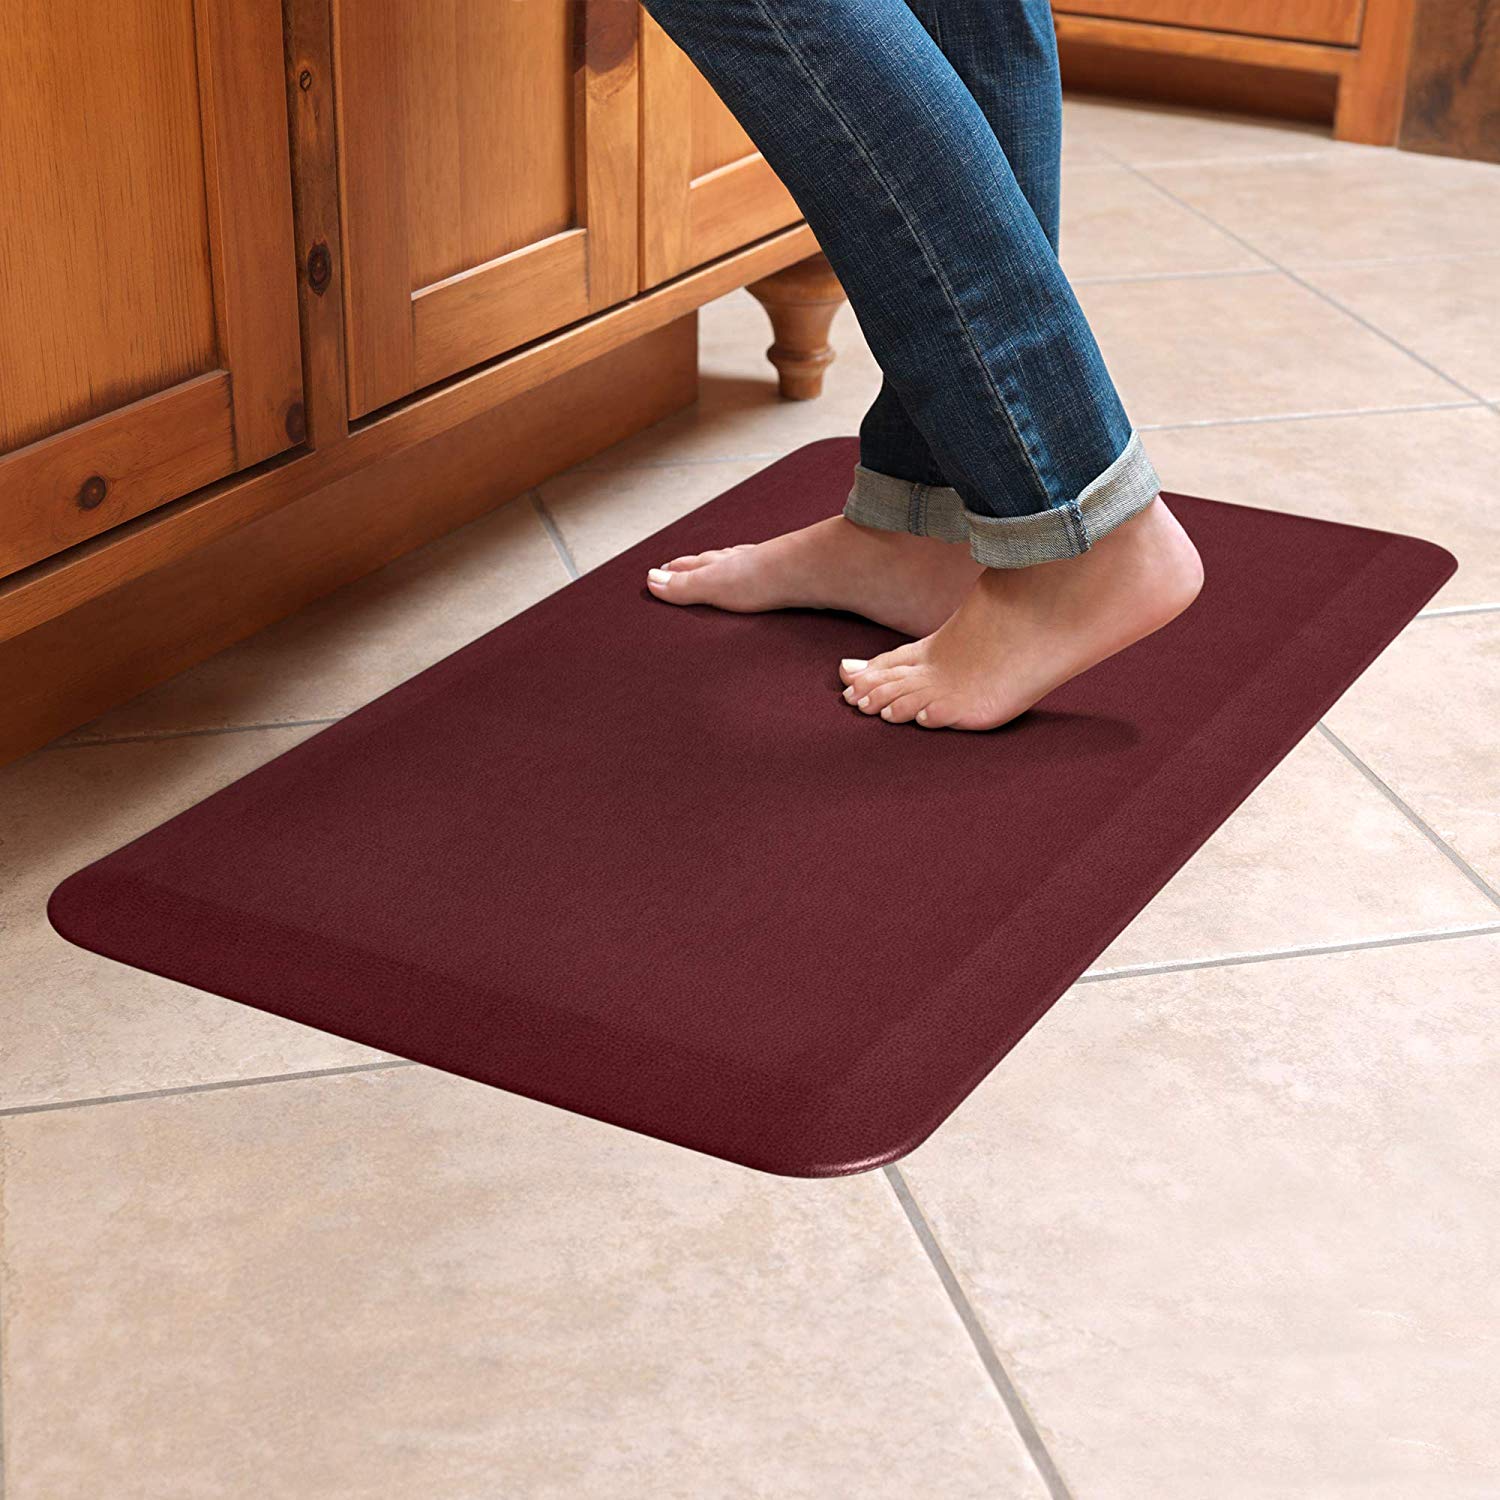 stropdas Mens Rechtdoor Protect Your Feet By Getting The Best Anti-Fatigue Kitchen Mat of 2023